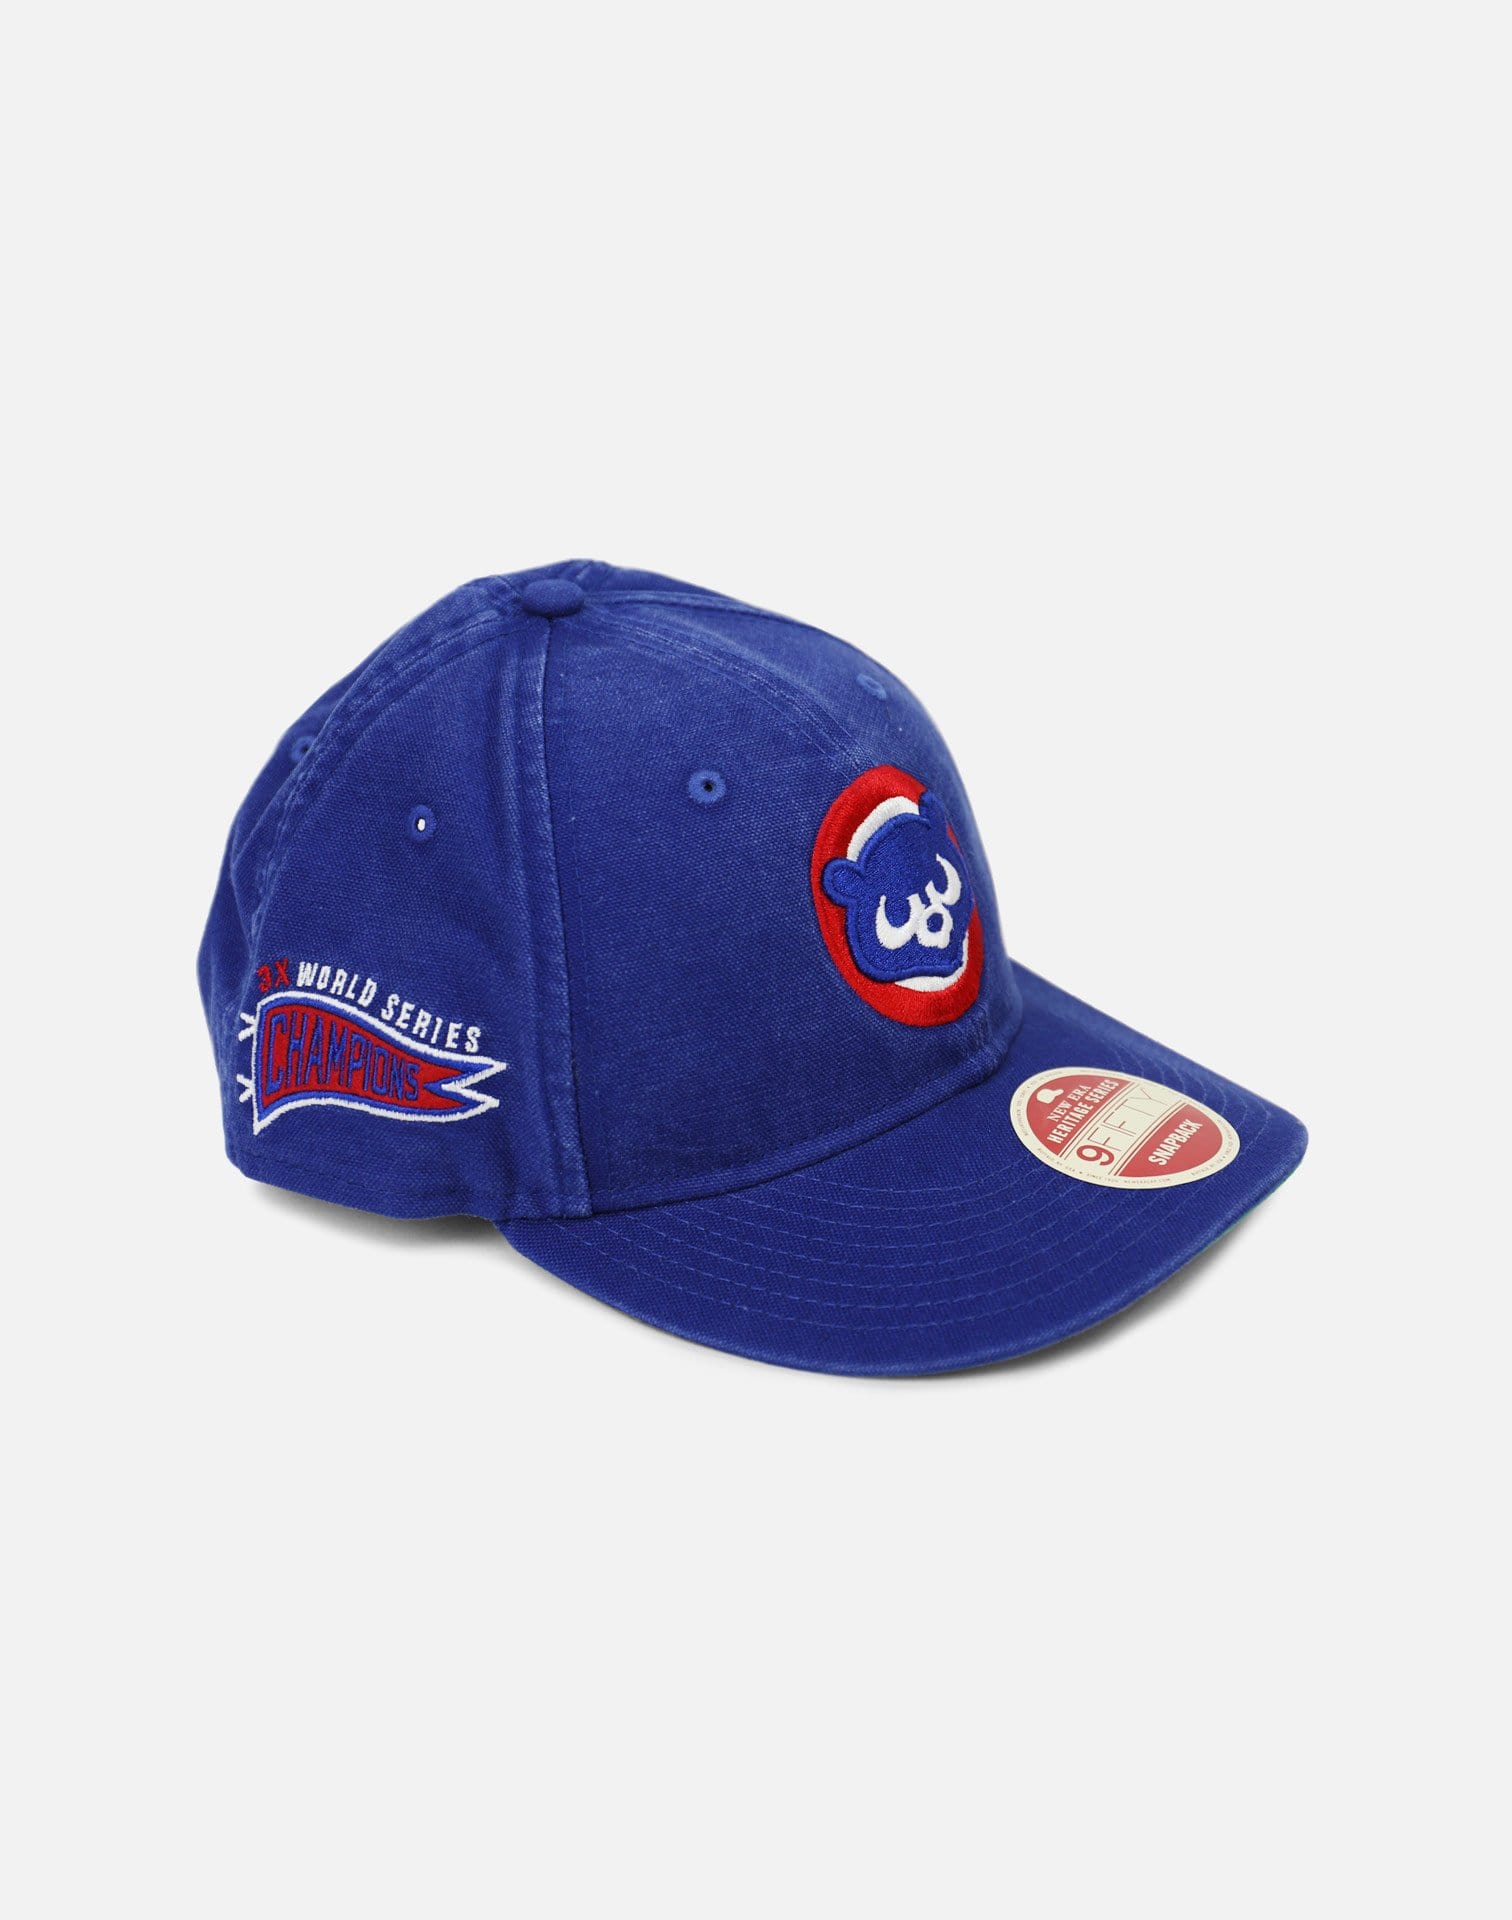 New Era Chicago Cubs Vintage Tribute Dad Hat (Blue/White-Red)